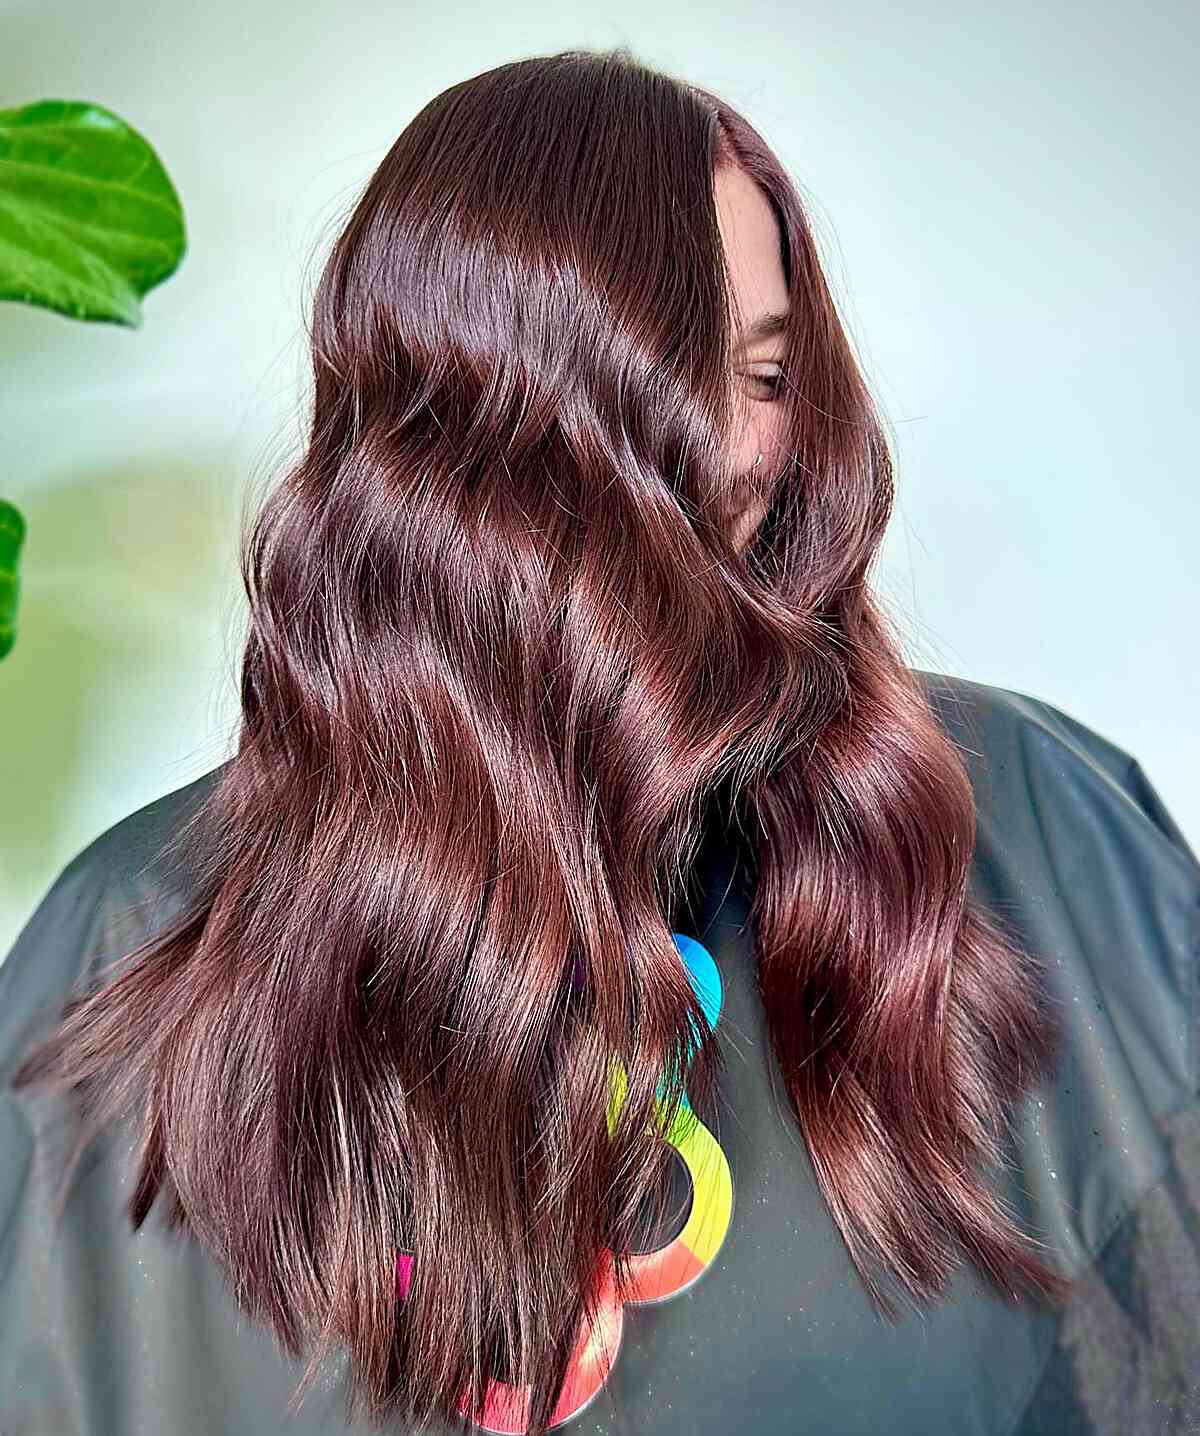 Blended Cherry and Mahogany Highlights on Longer Locks with Choppy Ends